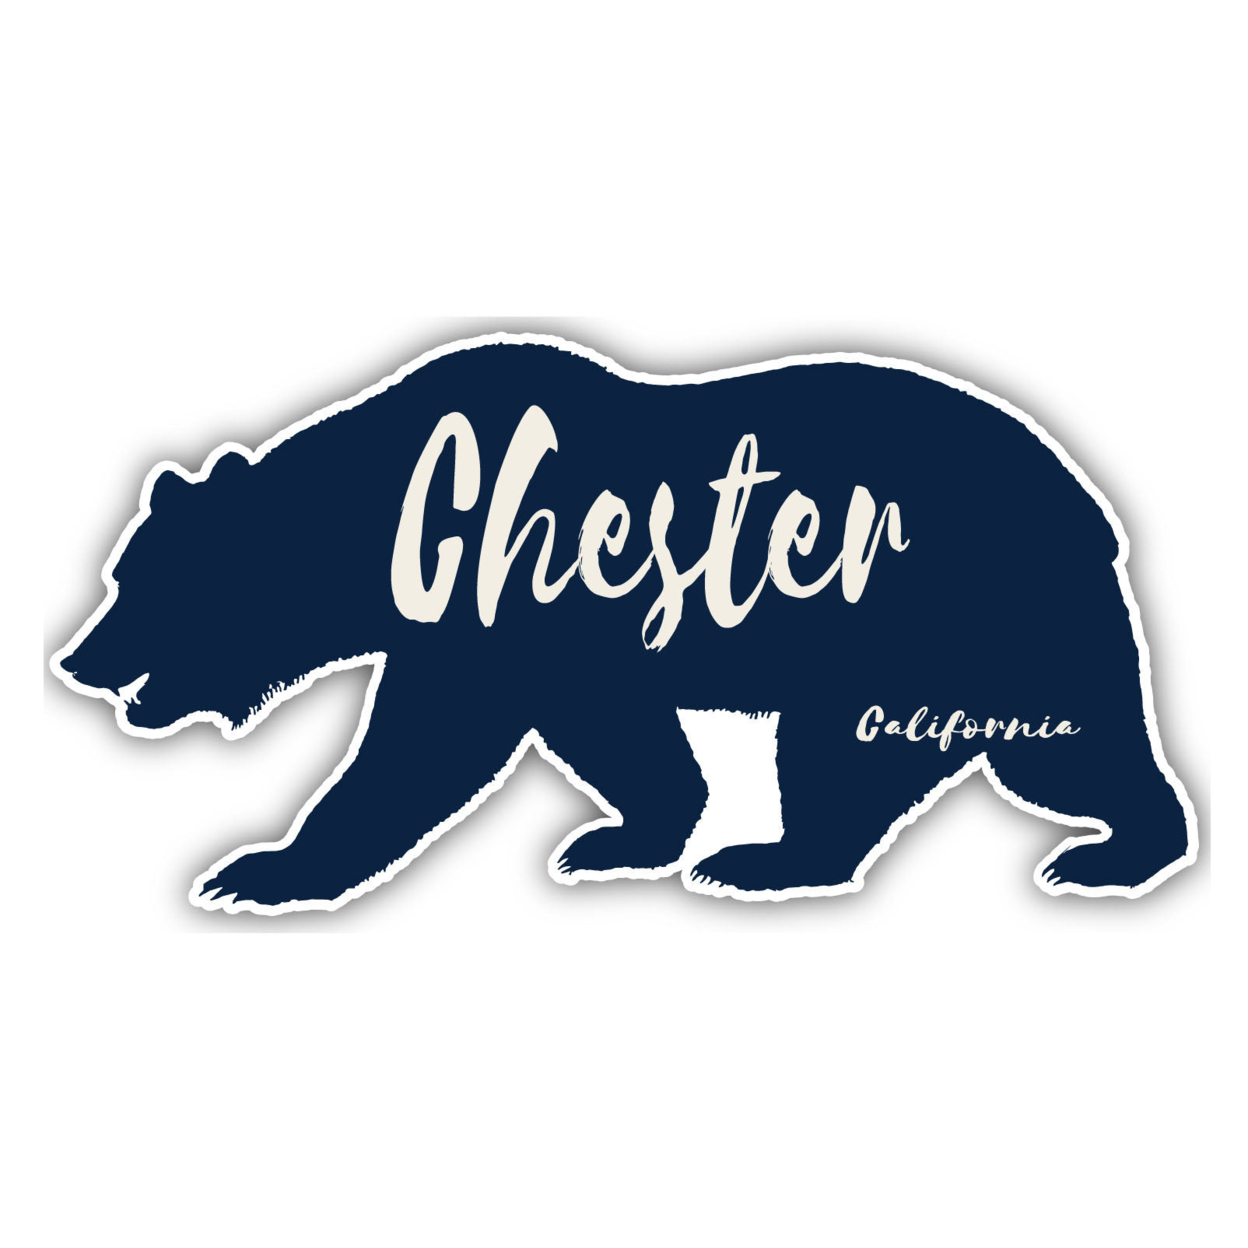 Chester California Souvenir Decorative Stickers (Choose Theme And Size) - 4-Pack, 4-Inch, Great Outdoors